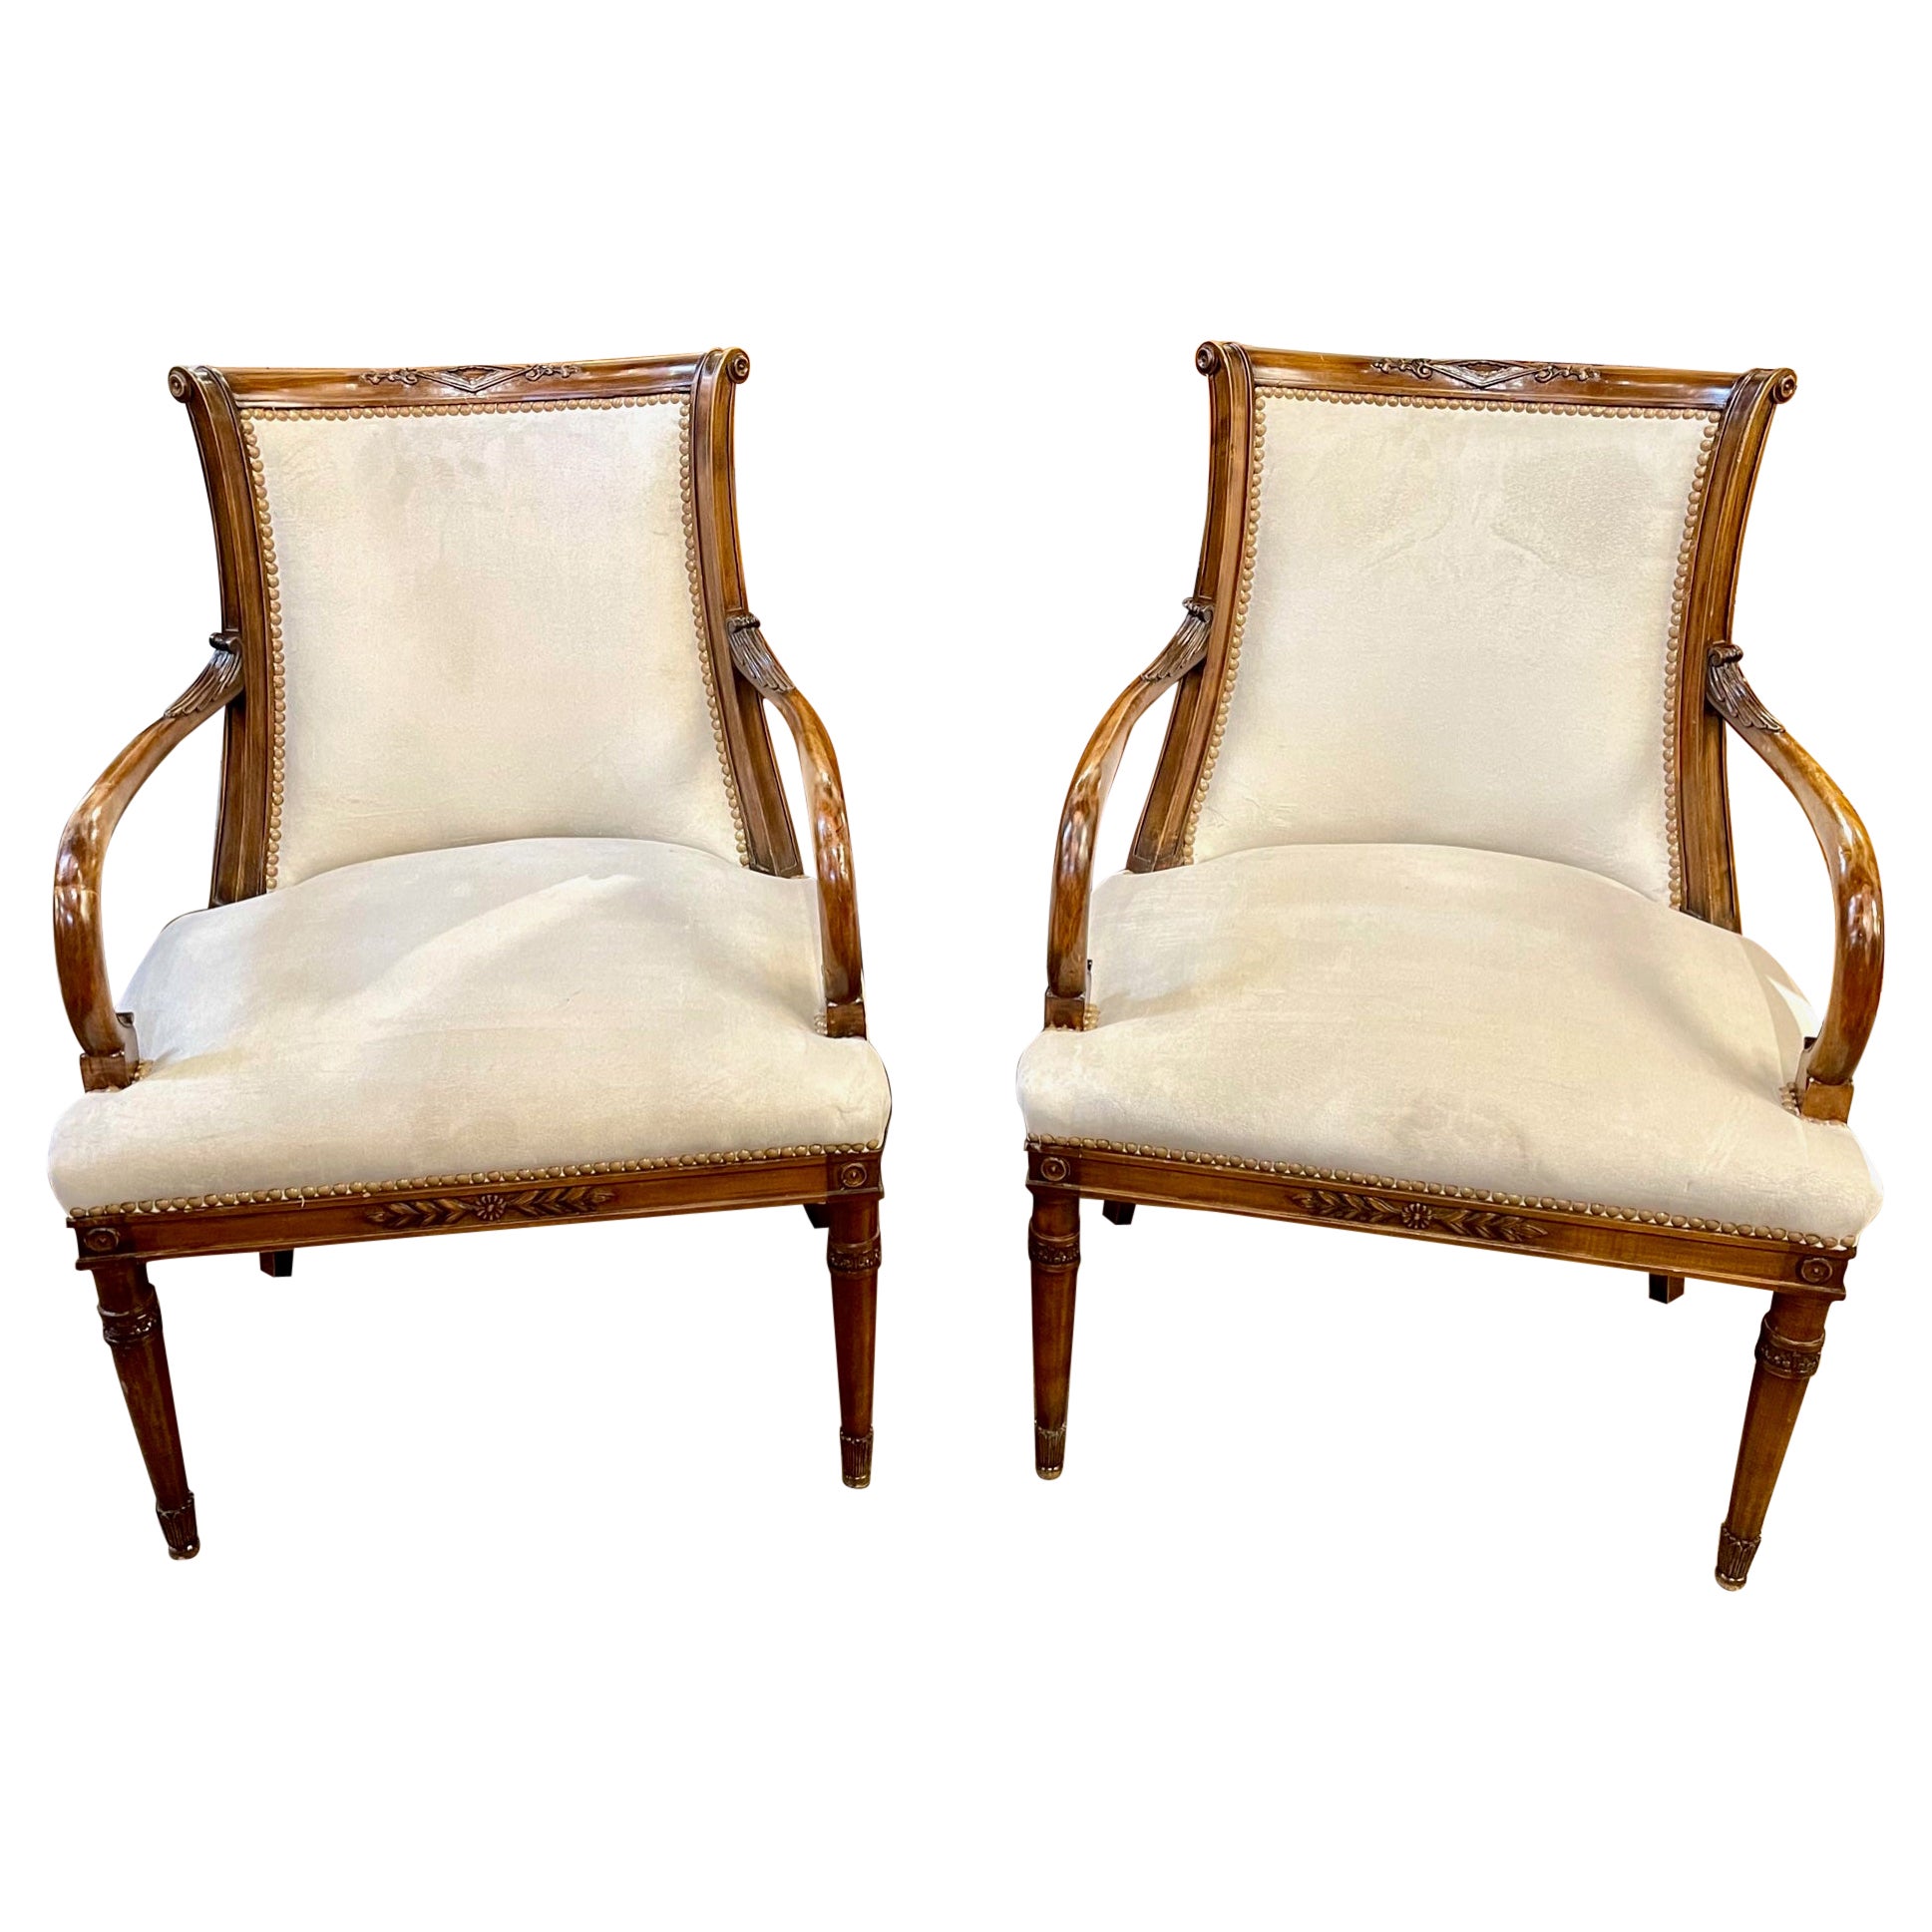 Pair of French Directoire' Style Armchairs